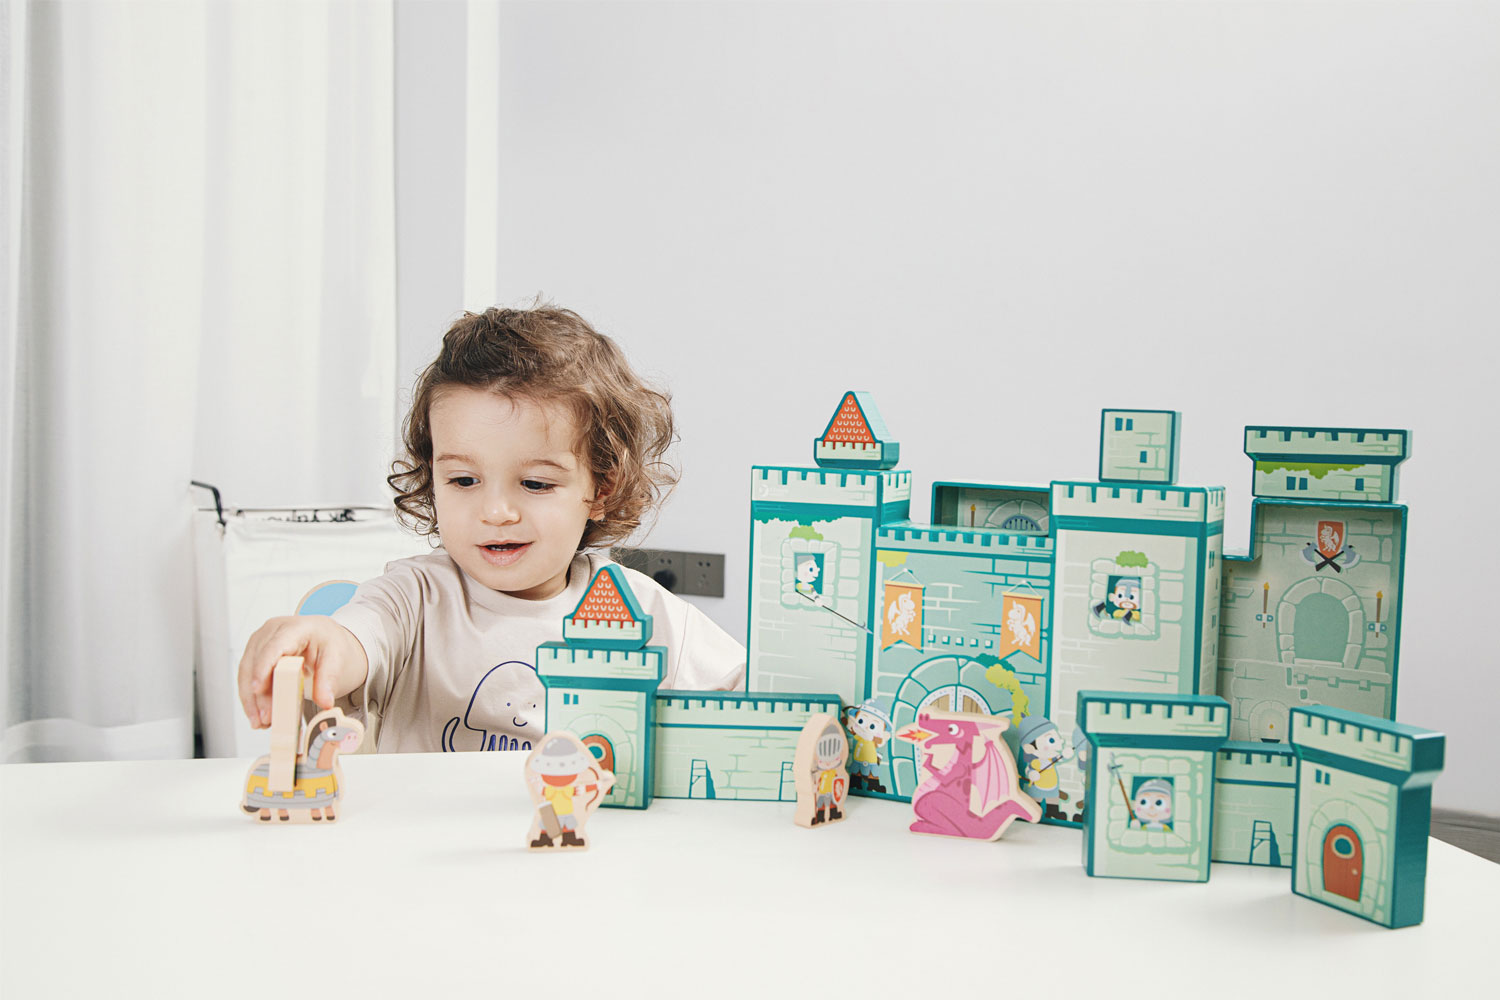 5 Benefits of Wooden Toys for Children: What Parents Need to Know